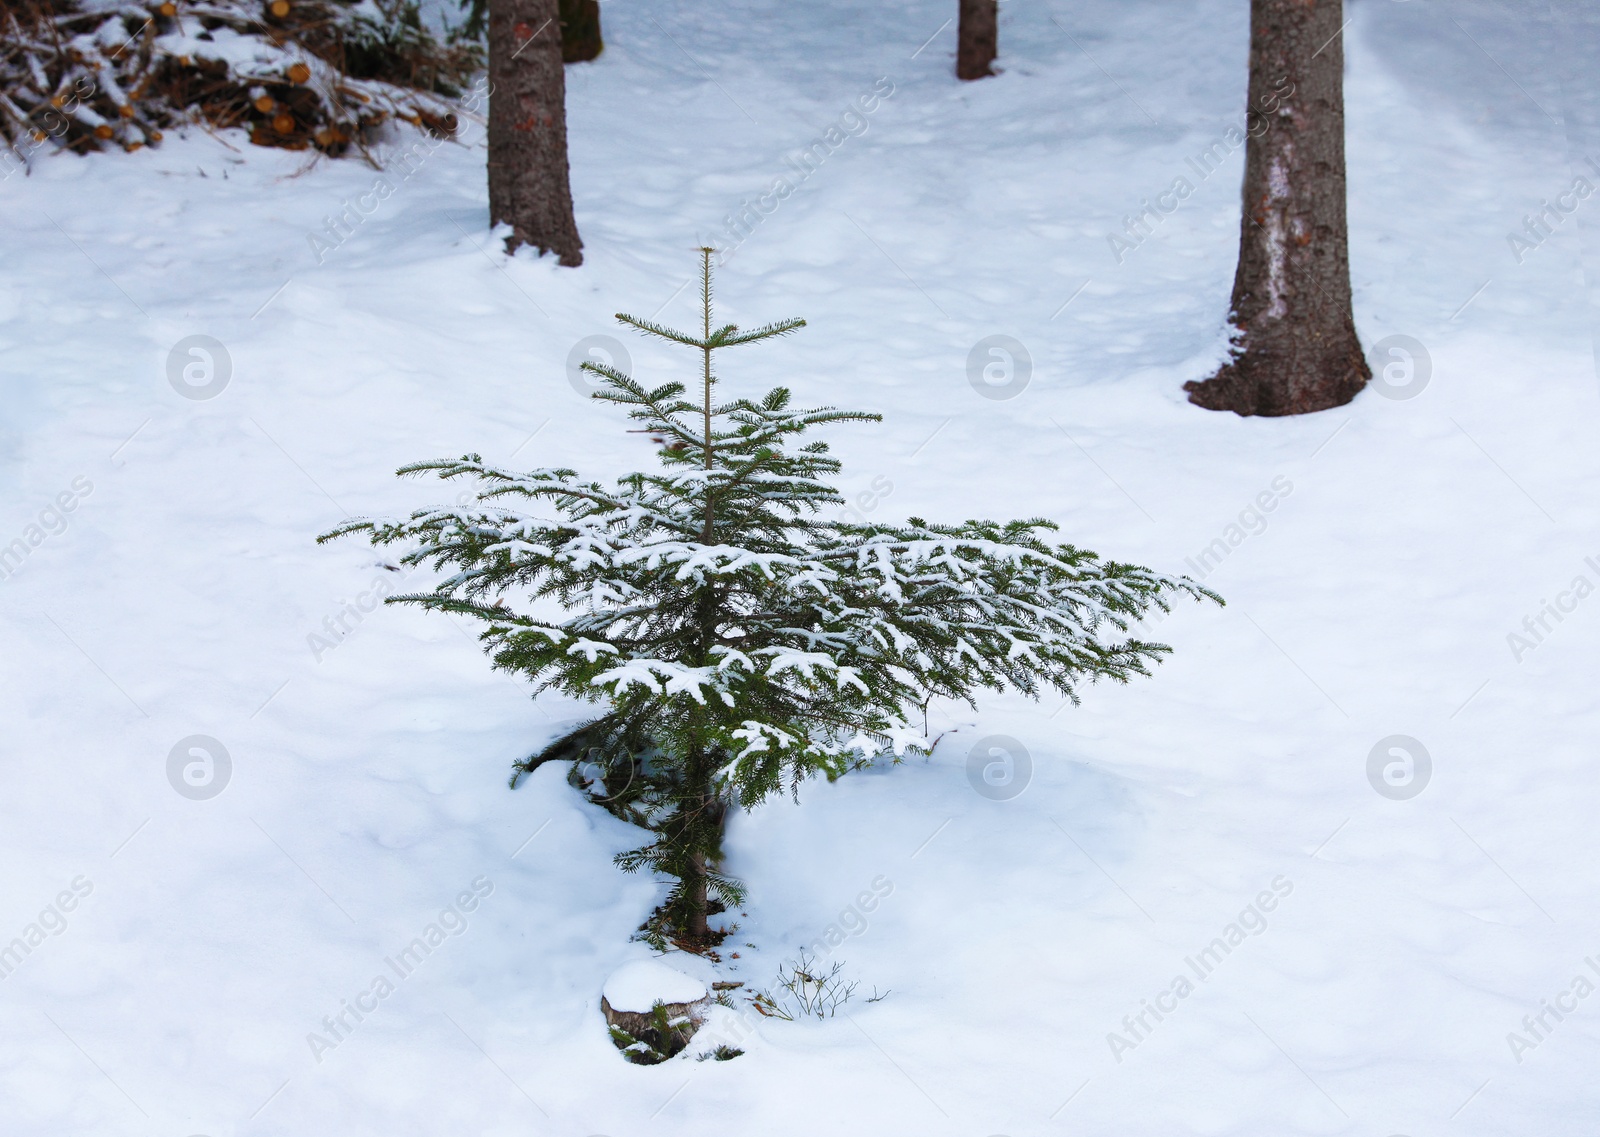 Photo of Fir tree and snow on ground in forest